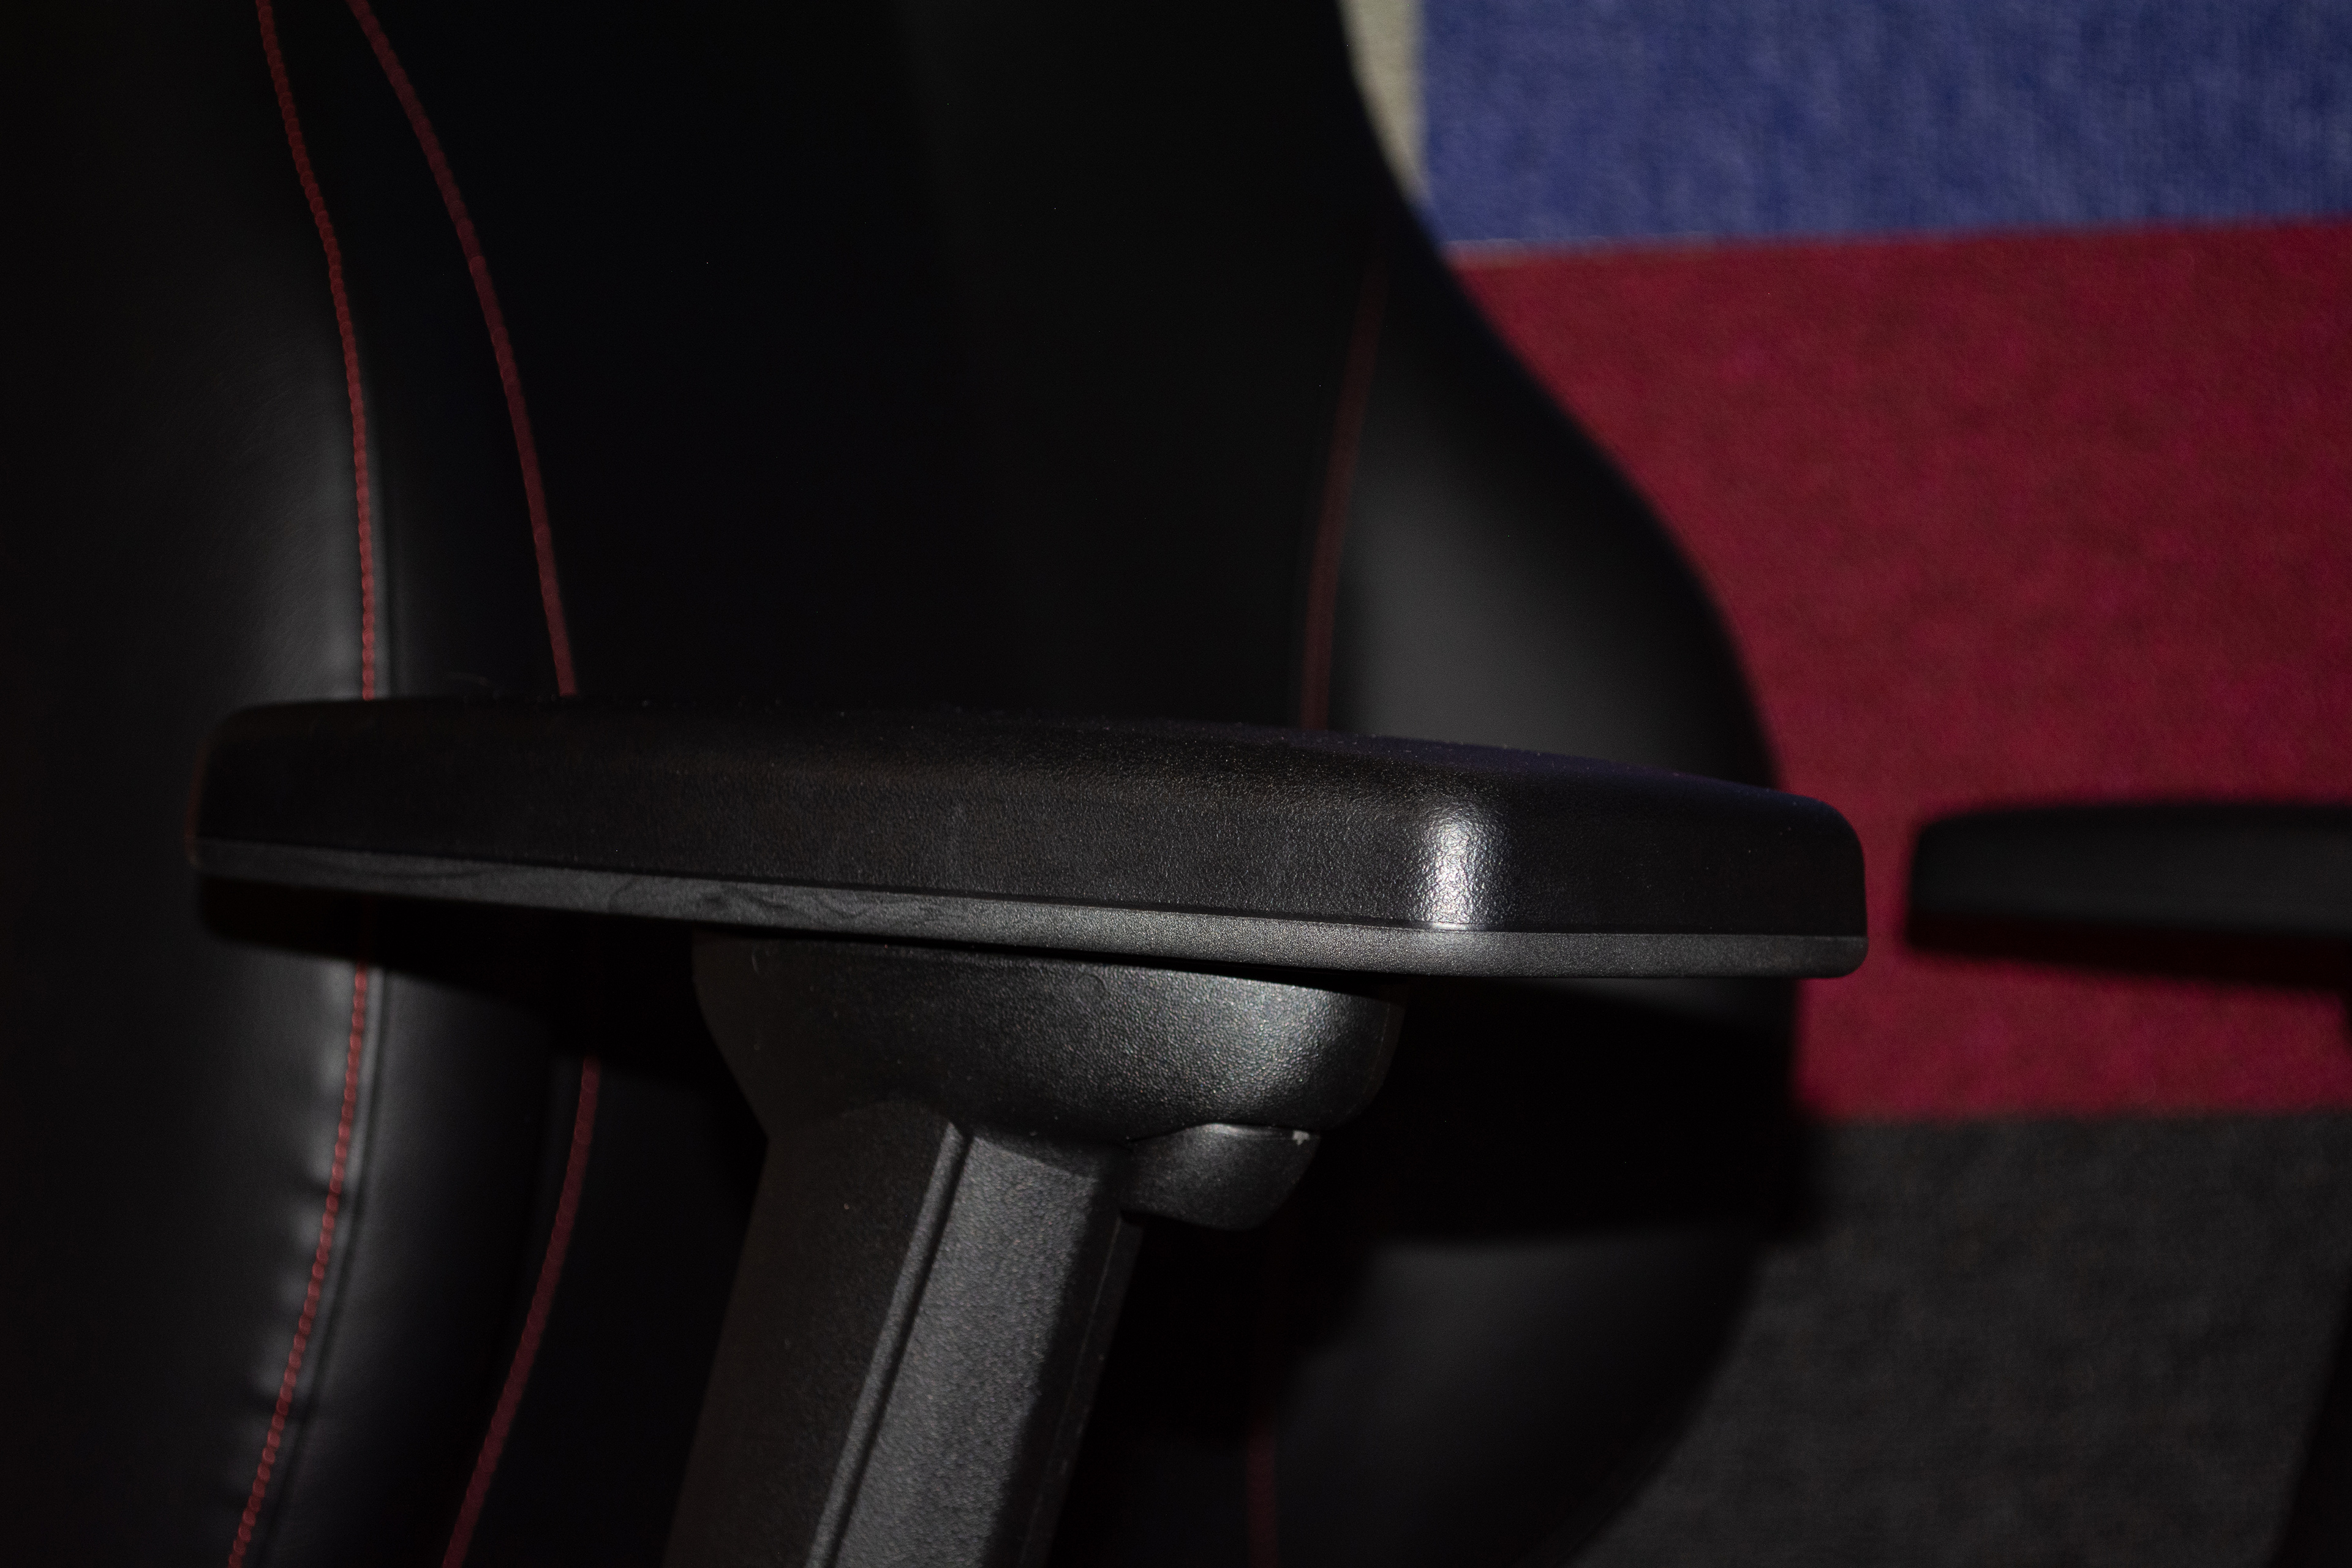 Armrest on the EDGE GX1 gaming chair